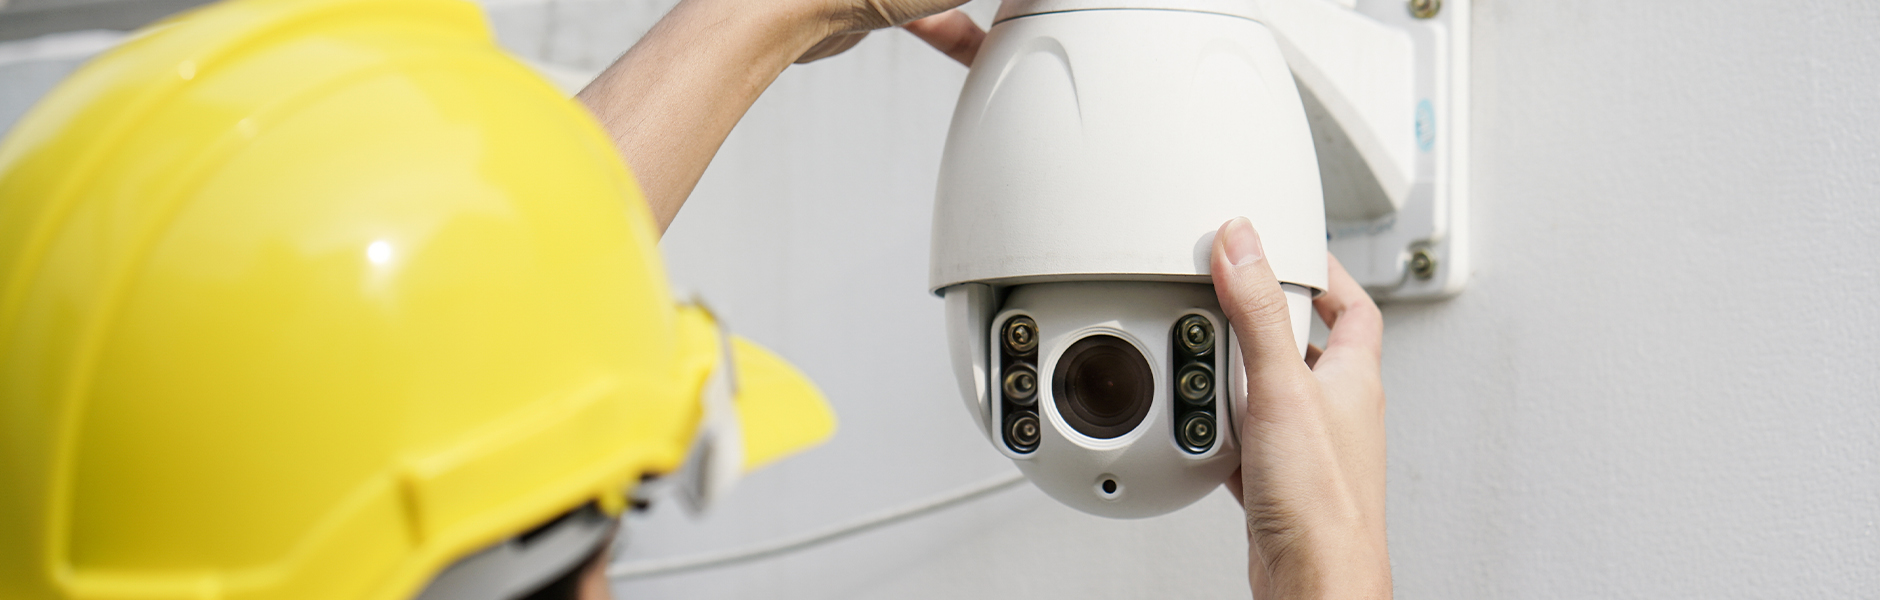 5 Technologies You Need to Know Before Buying a Security Camera System